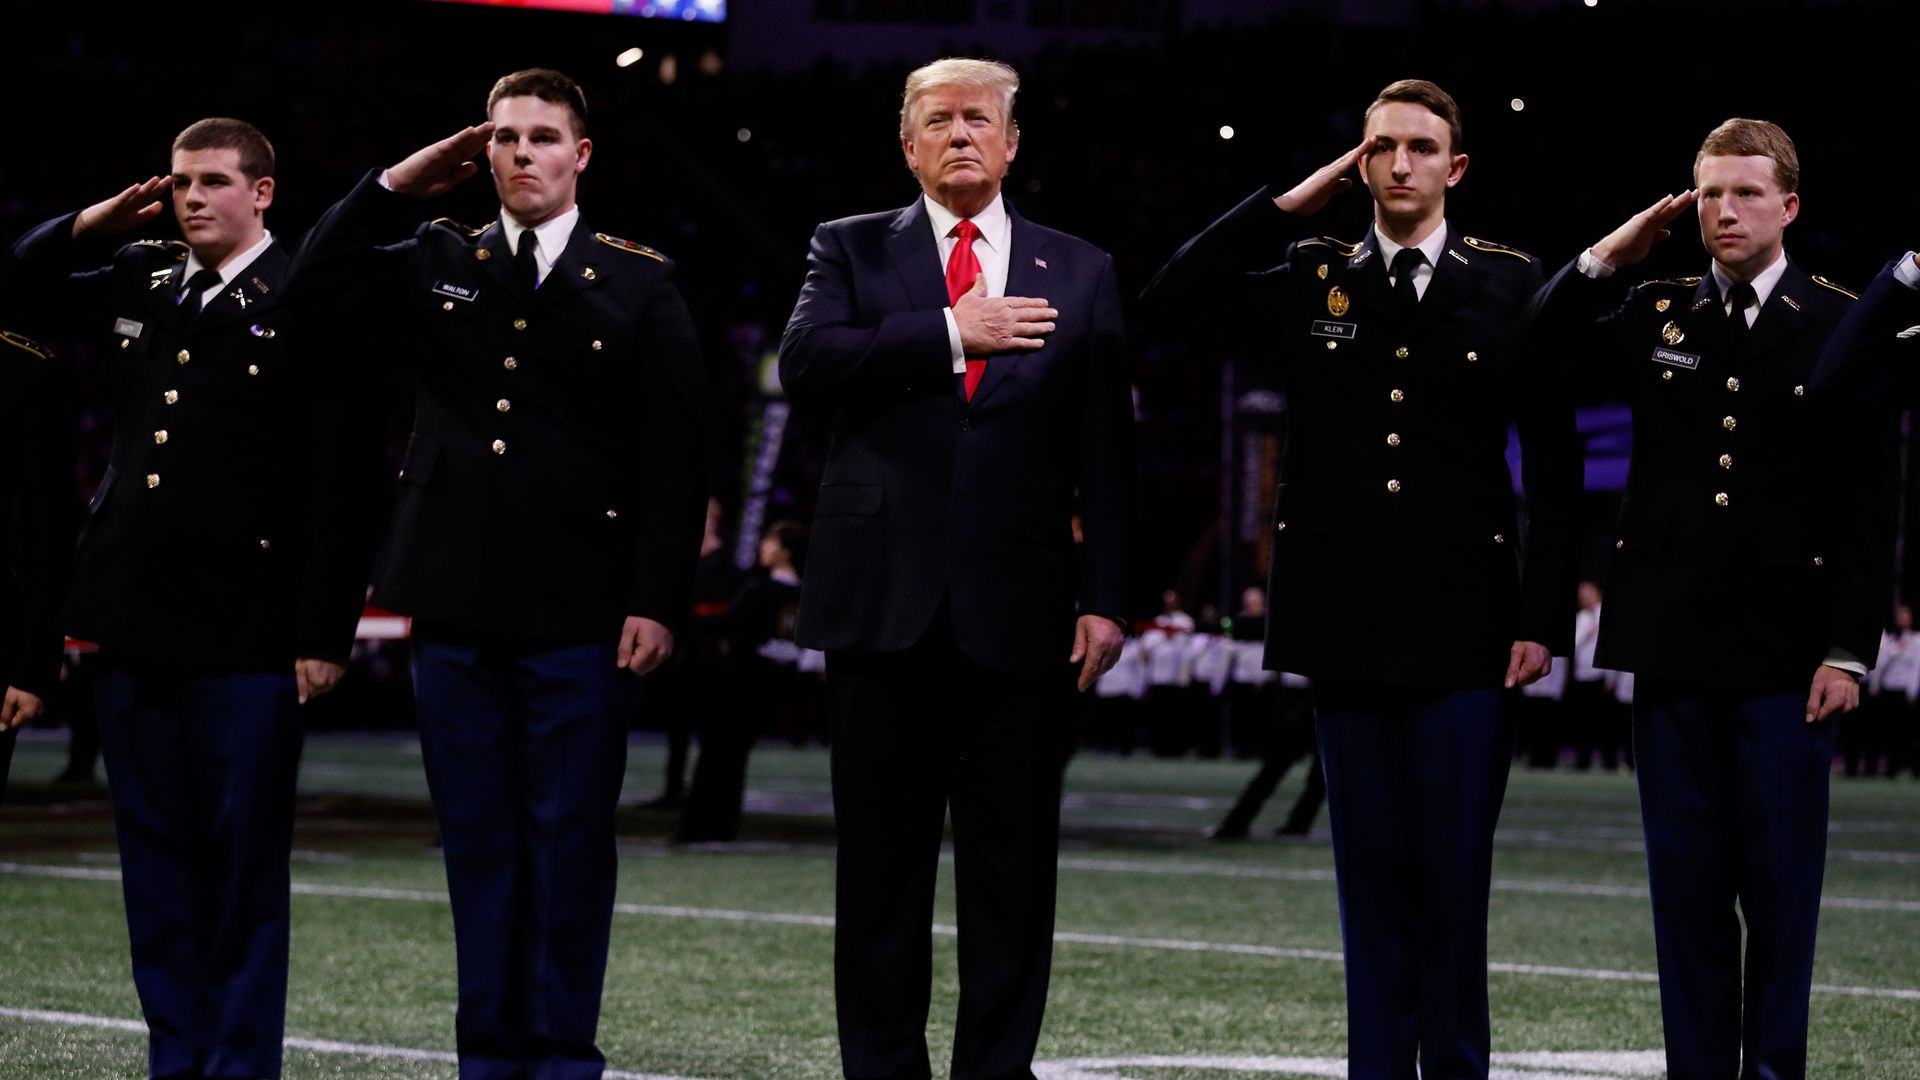 President Trump with his hand over his heart during the national anthem